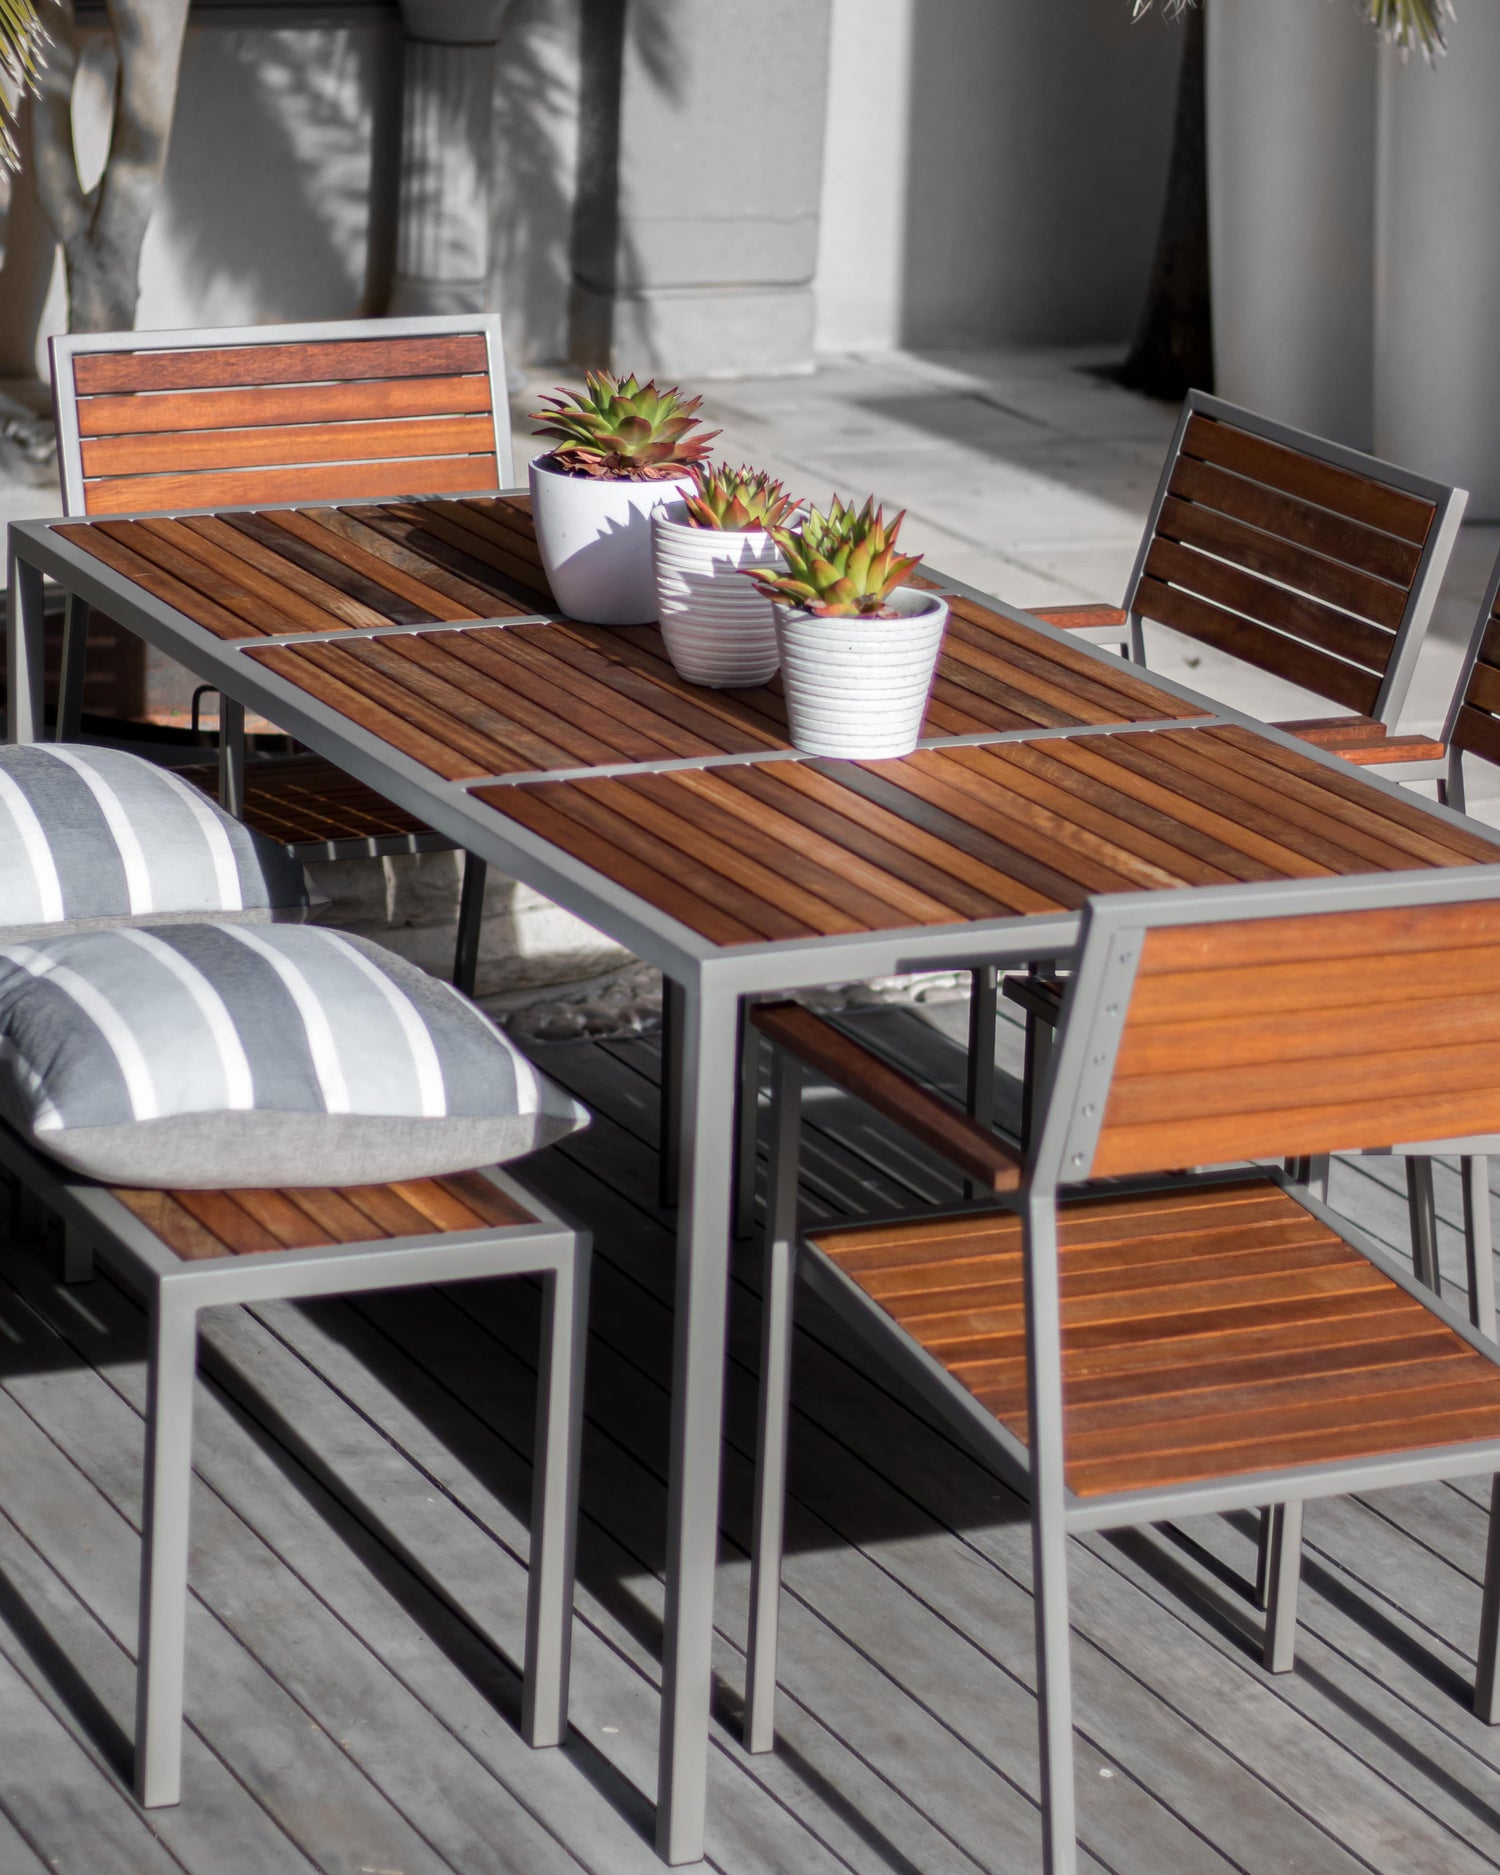 Kona Outdoor Table | Quality Solid Wood Furniture